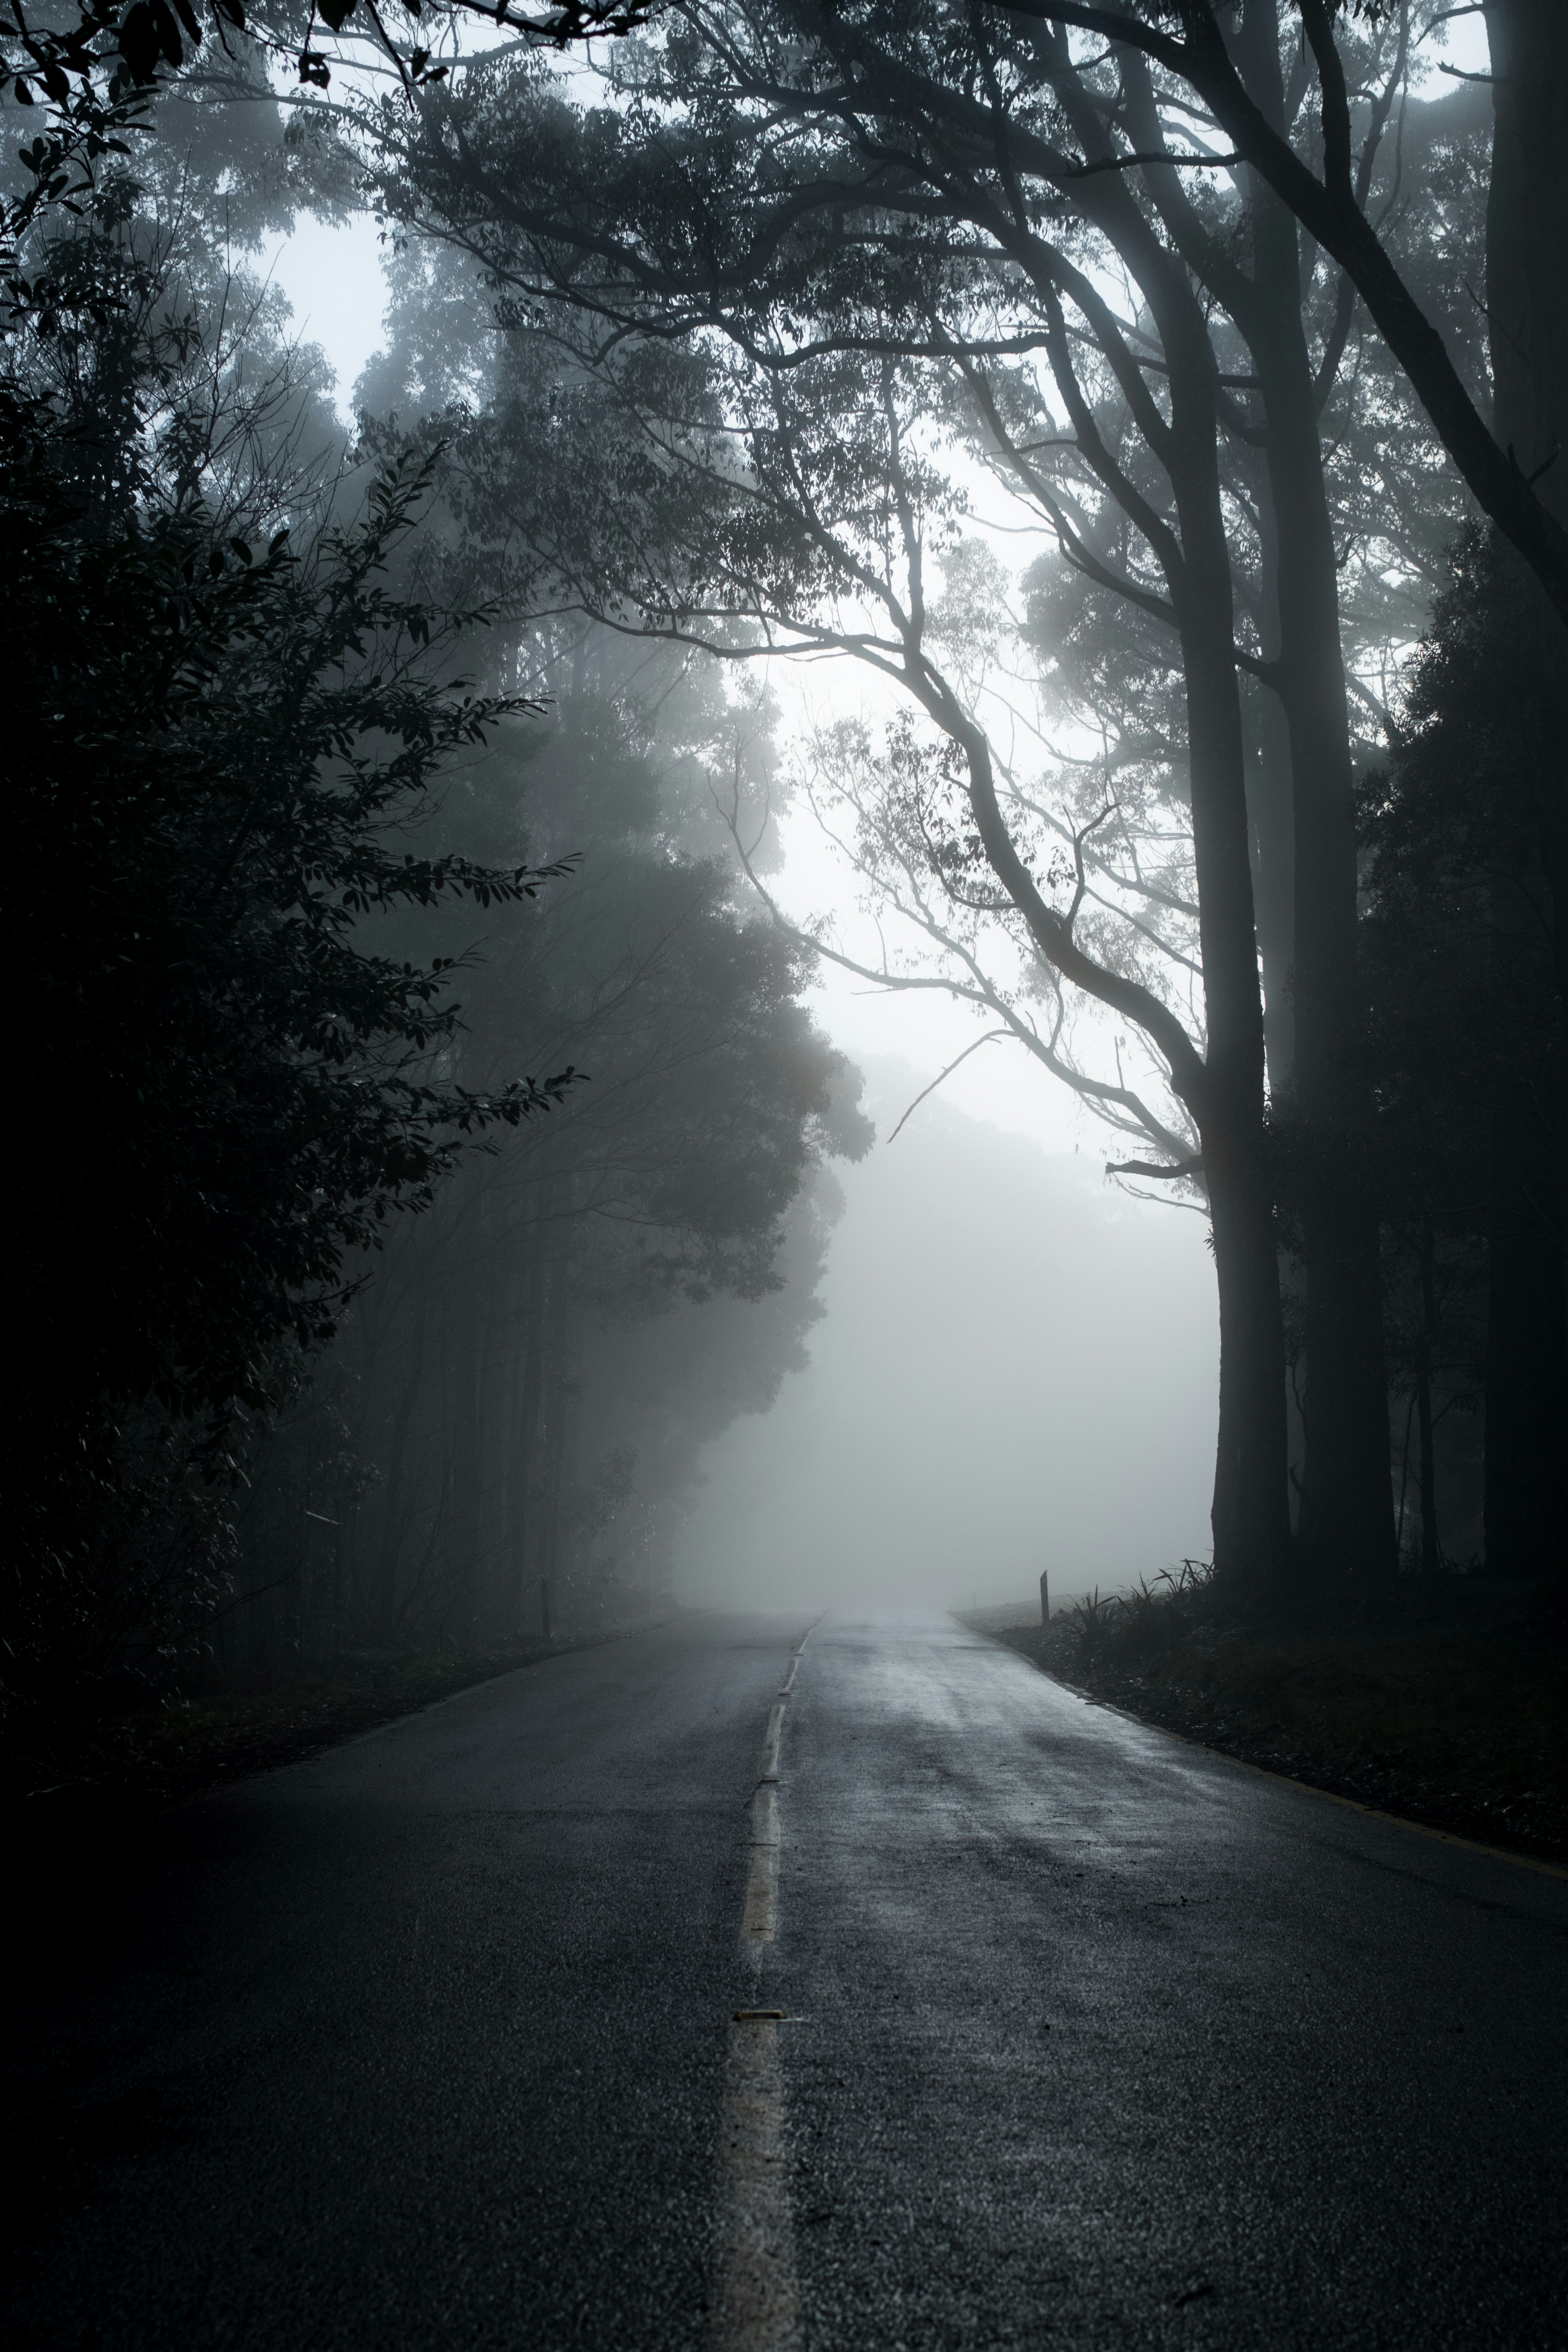 gray road in between trees in grayscale photography